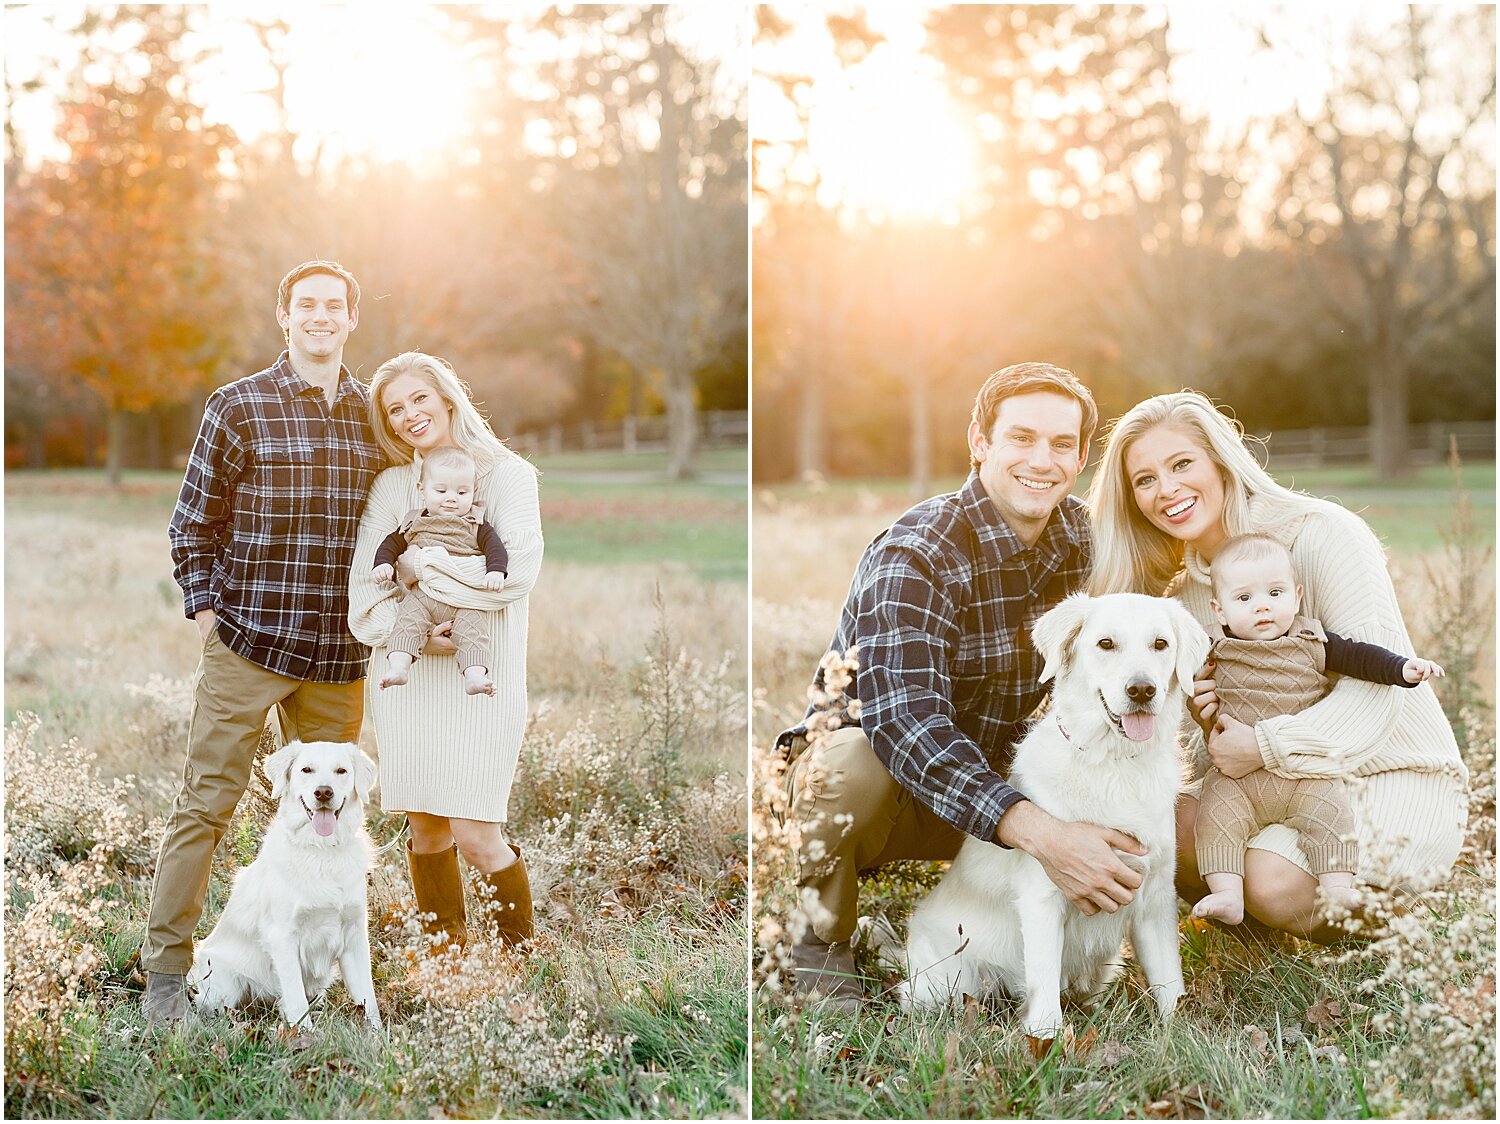 Family takes photos in the field at Waveny Park with dog. Photos by Connecticut Family Photography, Kristin Wood Photography.